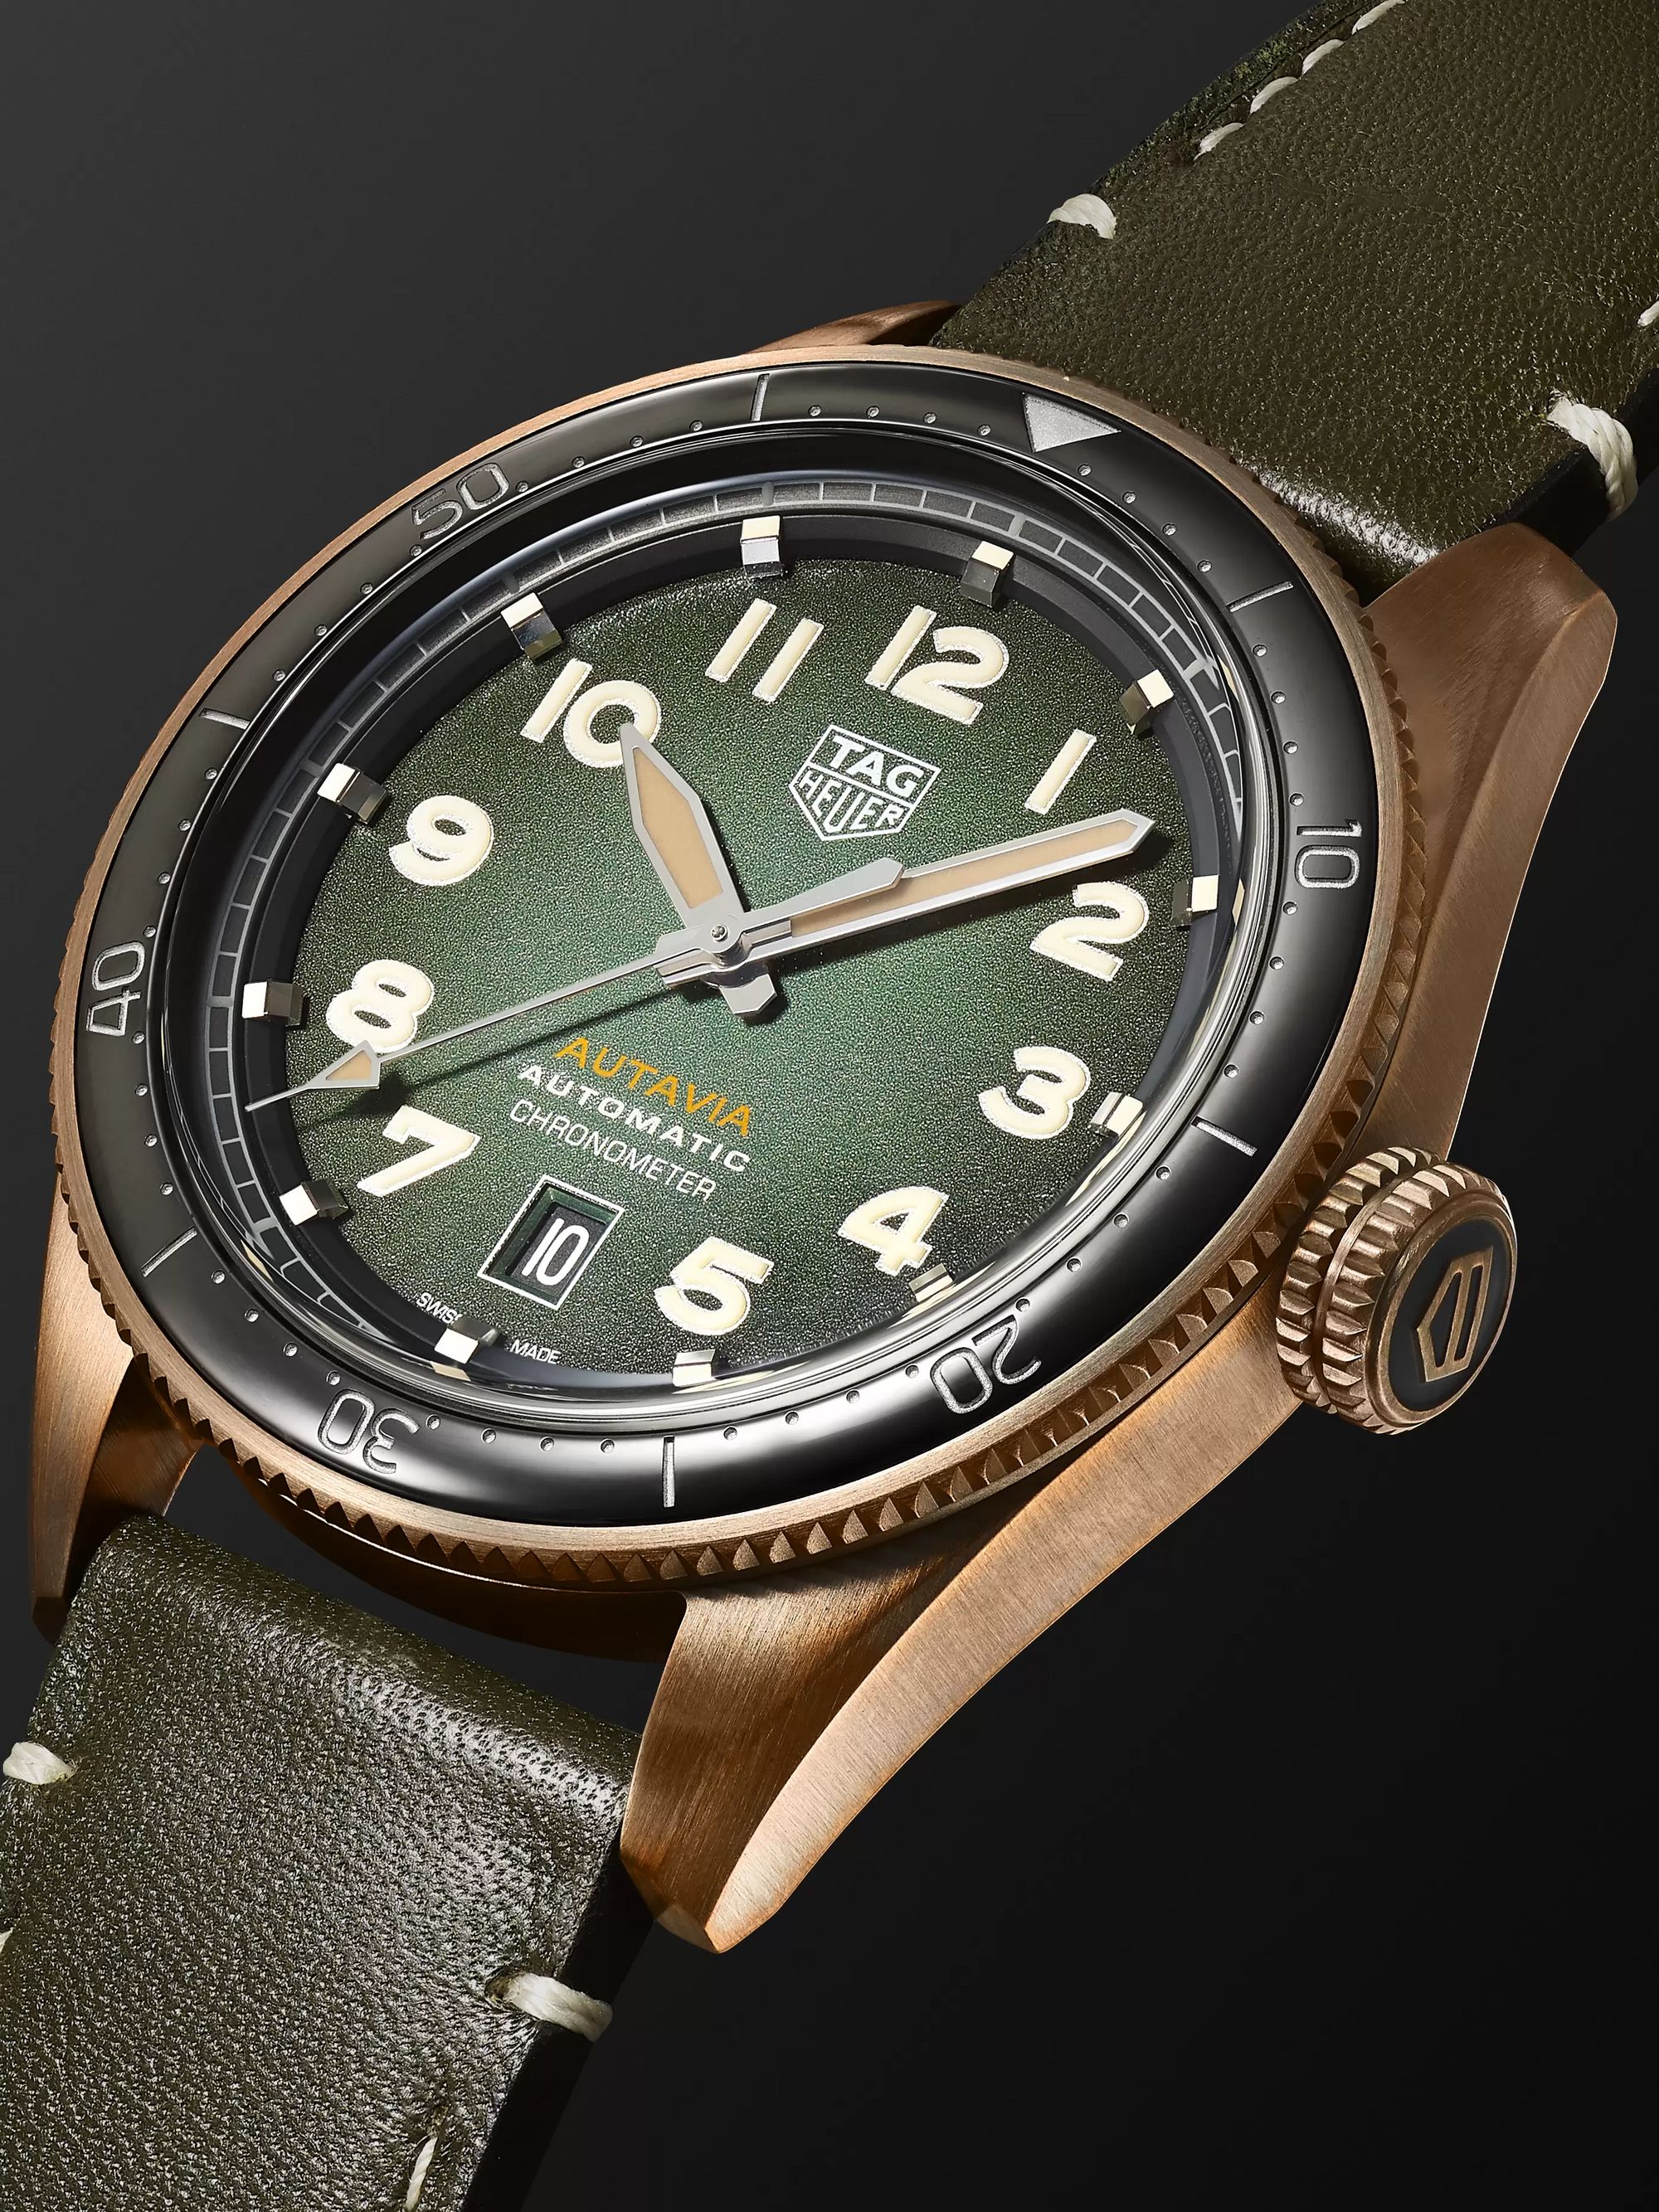 TAG Heuer Autavia Automatic Chronometer 42mm Bronze and Leather Watch, Ref. No. WBE5190.FC8268